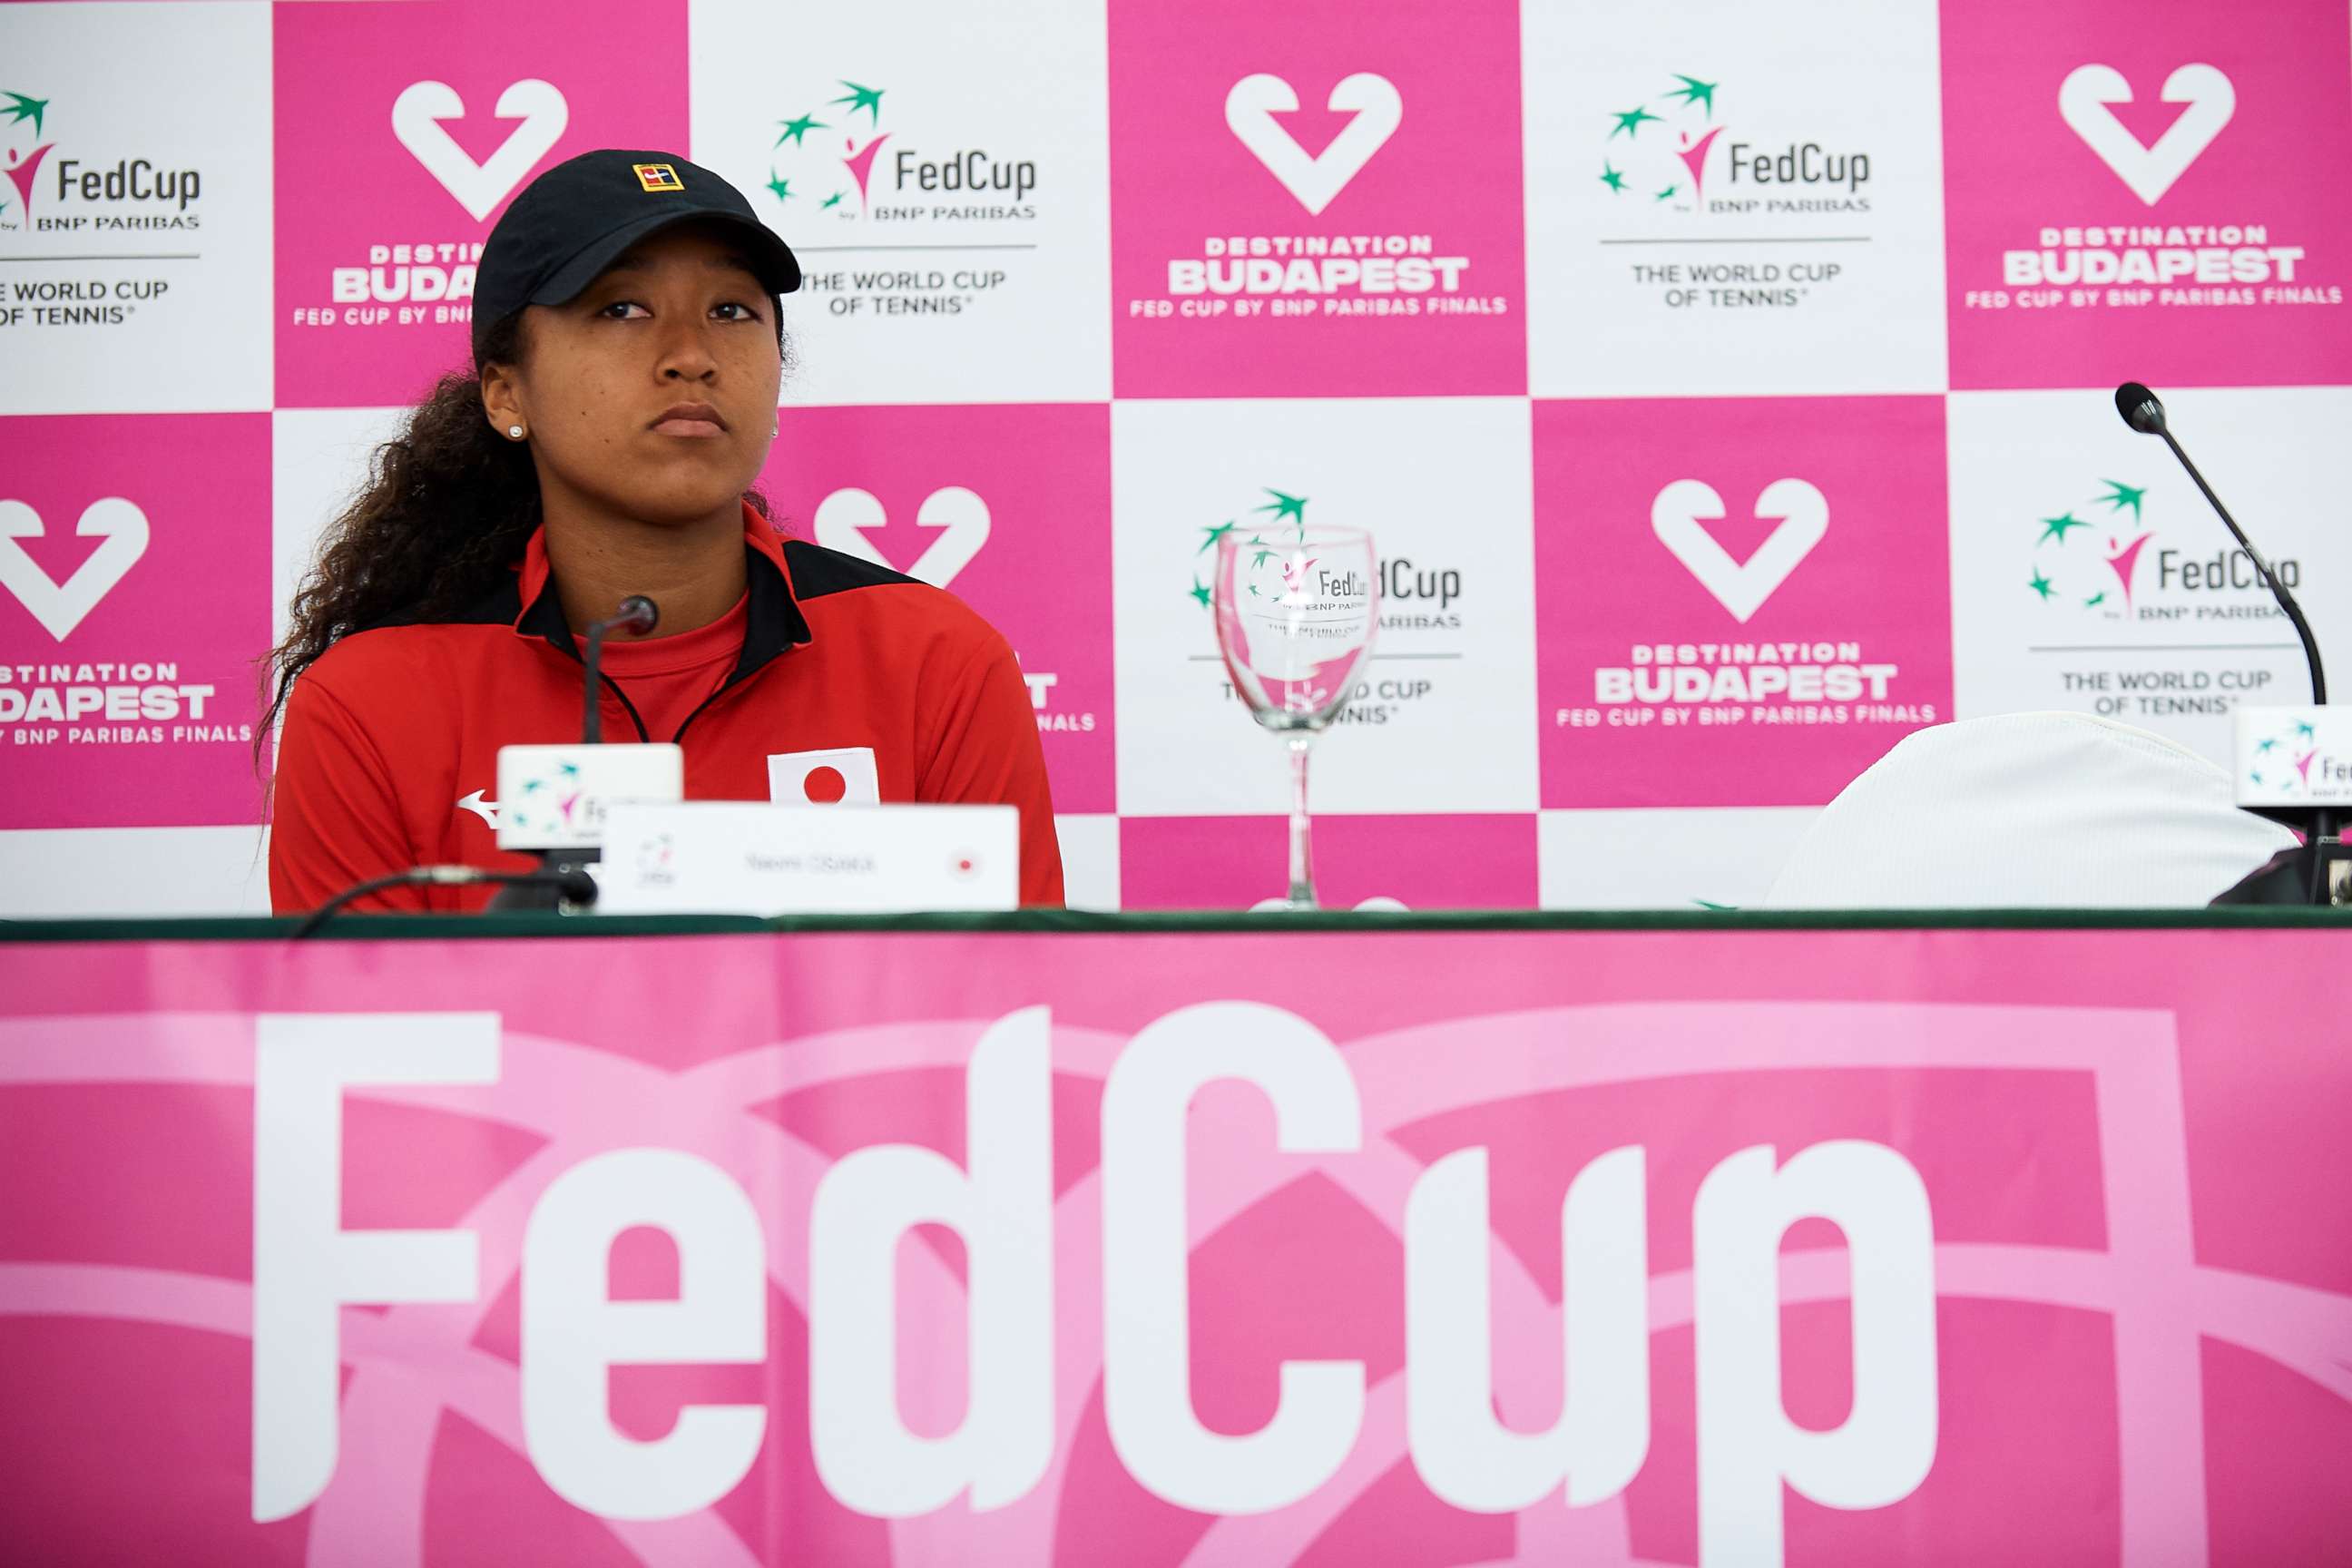 PHOTO: Naomi Osaka in this Feb. 7, 2020 file photo during the press conference at Centro de Tenis La Manga Club in Cartagena, Spain.